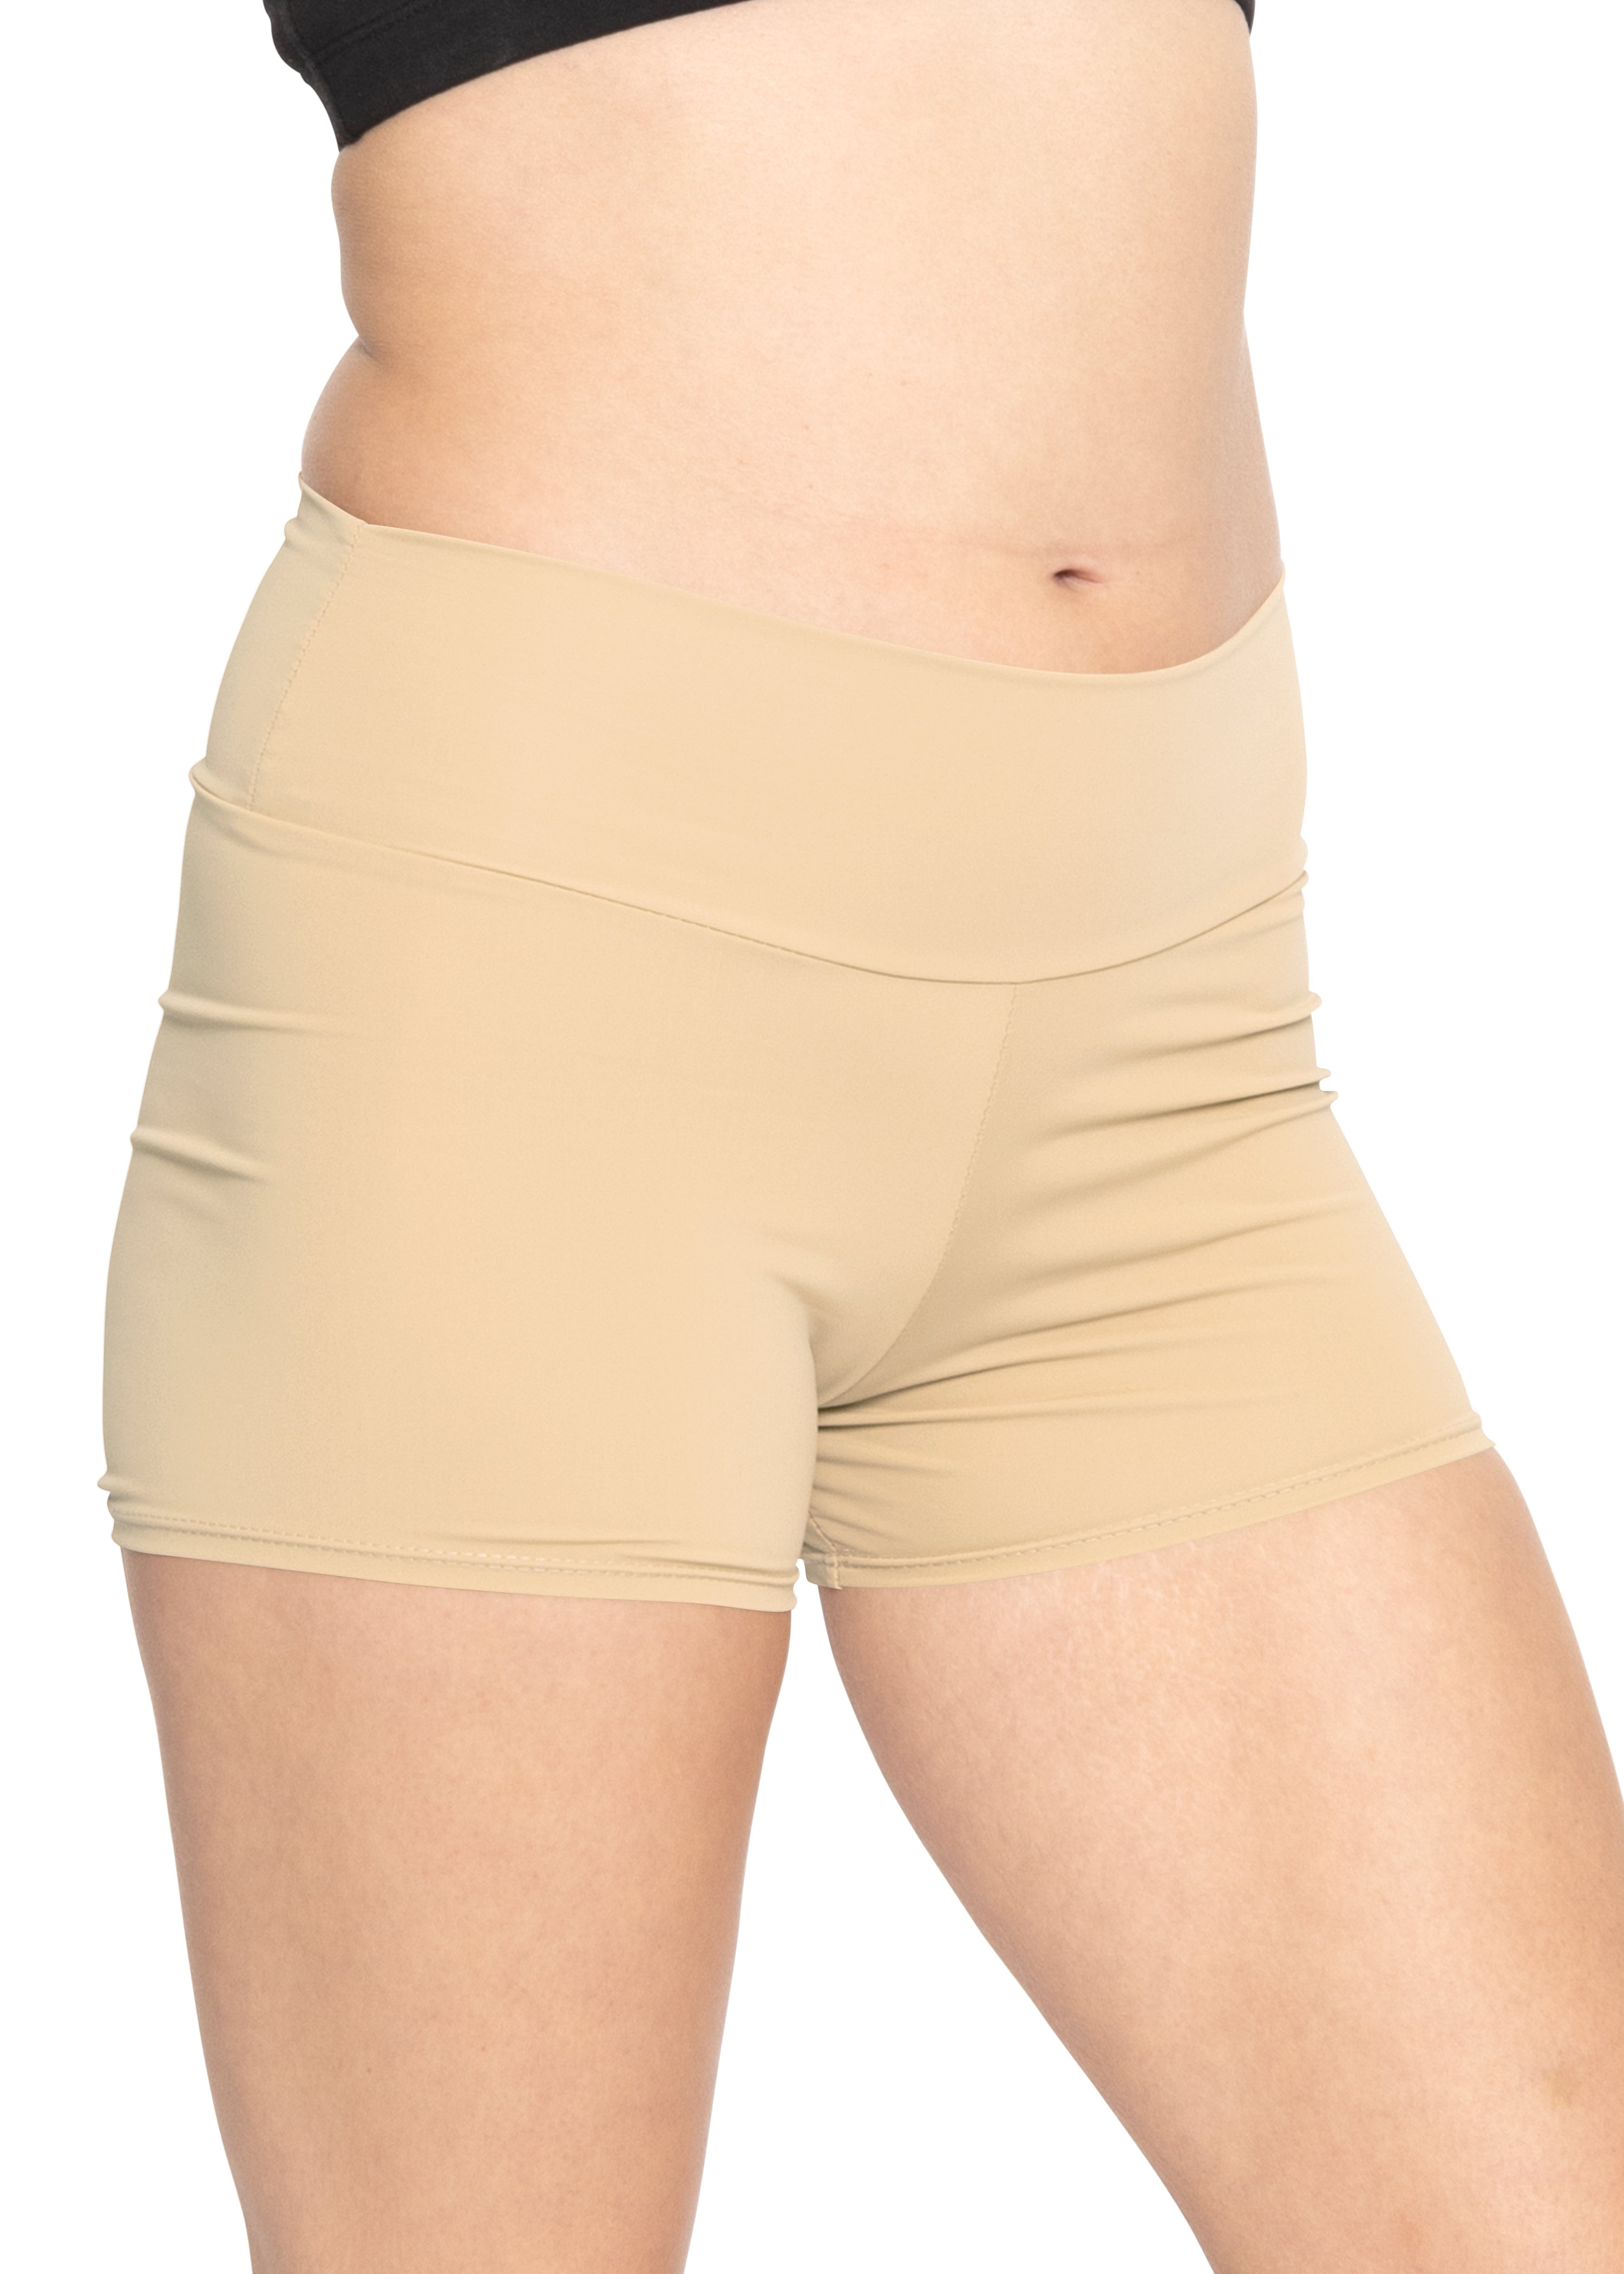 Women's, Girl's and Plus Size Stretch Performance High Waist Athletic Booty  Shorts - Walmart.com